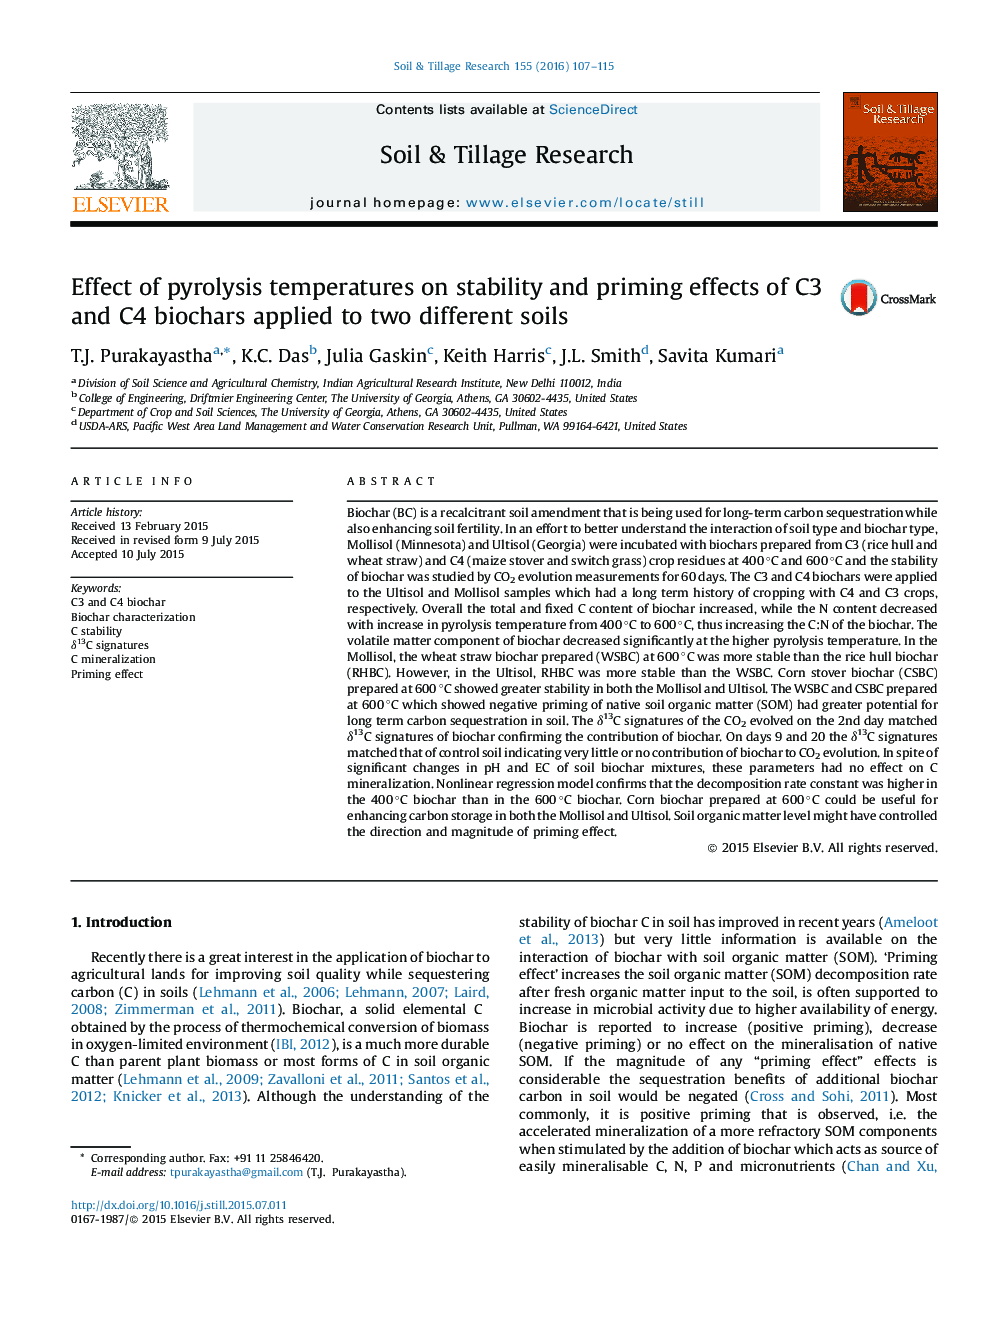 Effect of pyrolysis temperatures on stability and priming effects of C3 and C4 biochars applied to two different soils